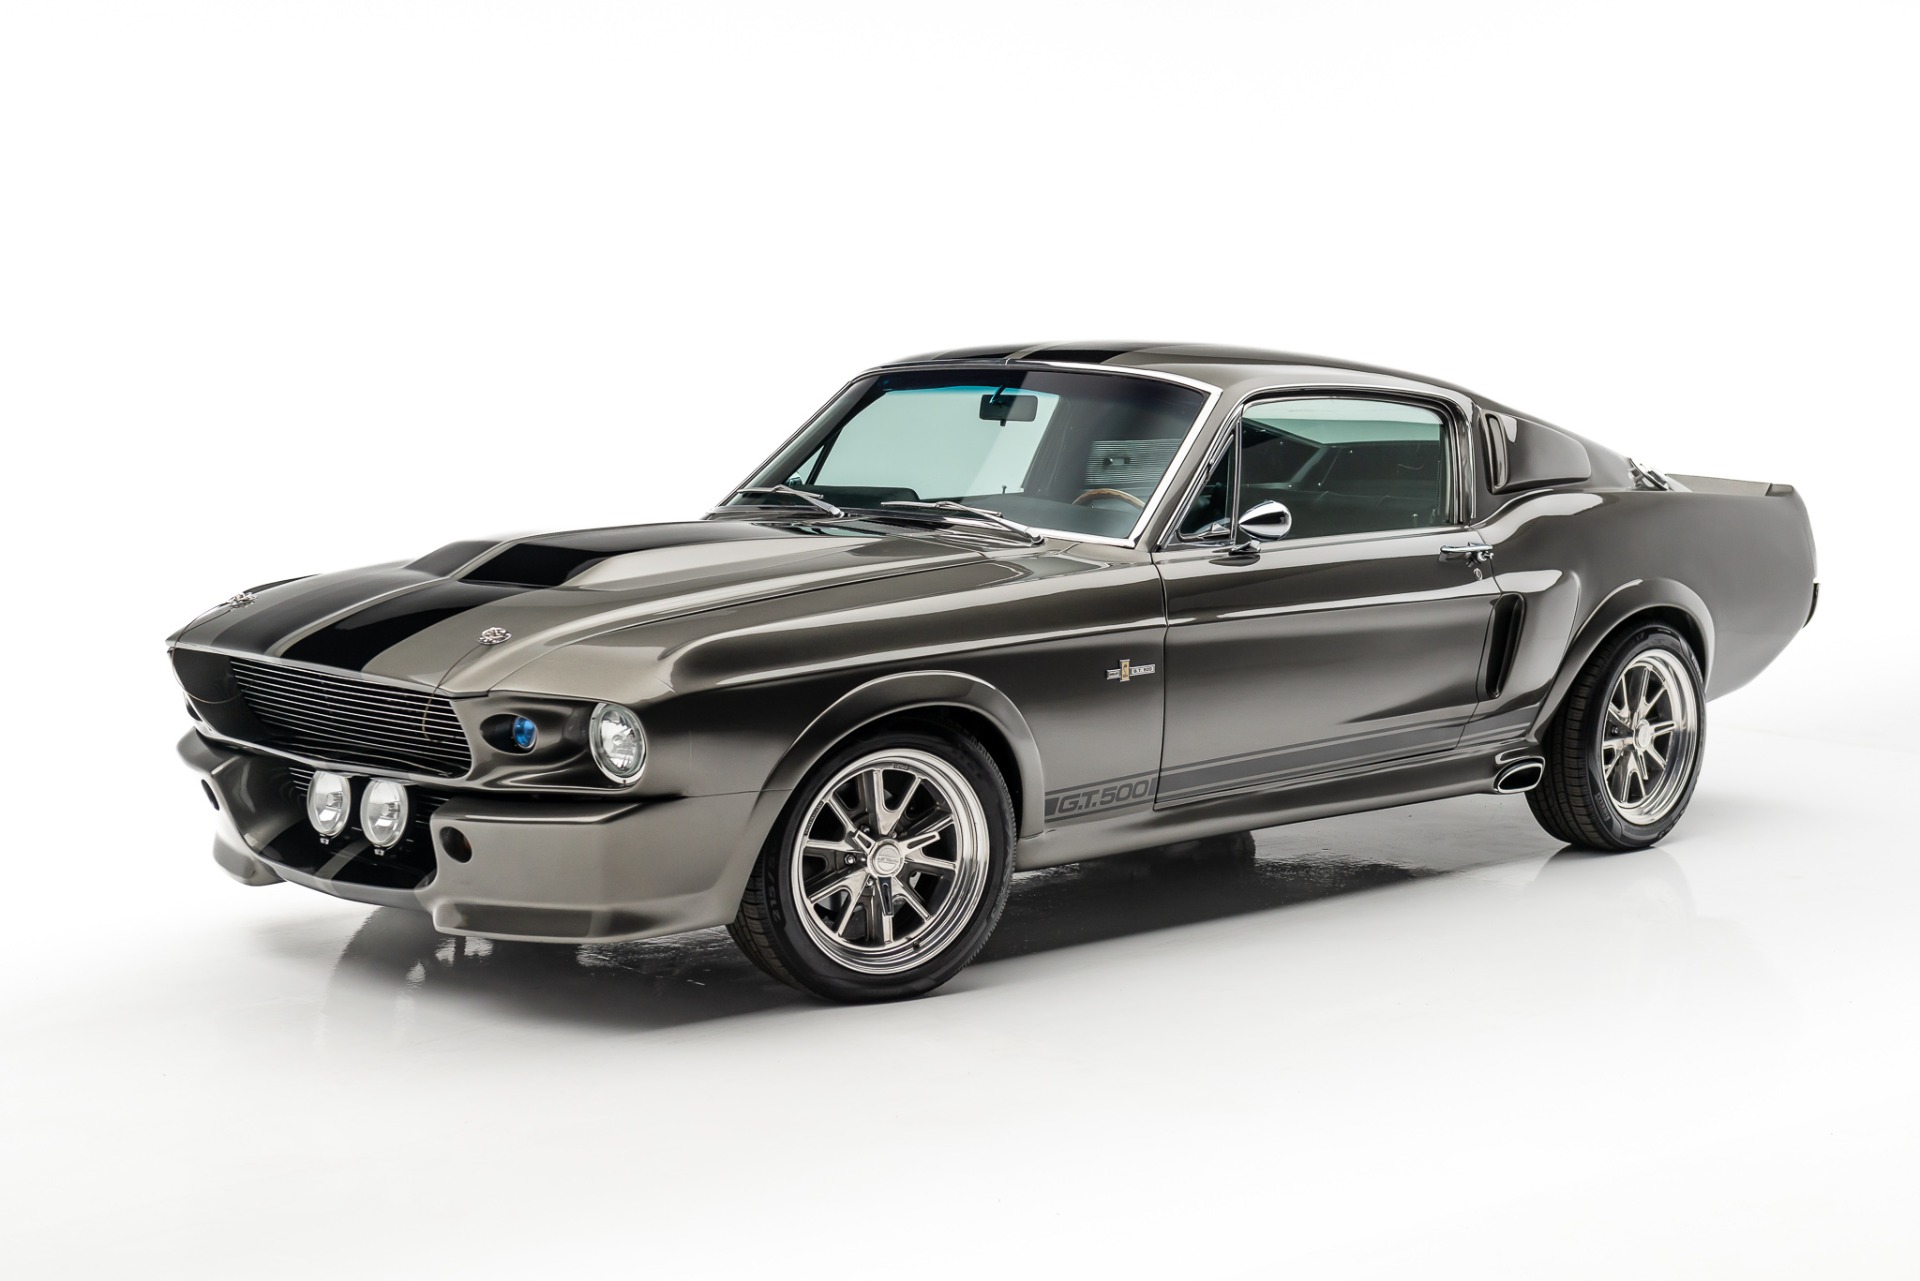 https://www.privatecollectionmotors.com/imagetag/260/main/l/Used-1968-Ford-Mustang-Shelby-GT500-Eleanor-Tribute-Shelby-GT500-Eleanor-Tribute-1668561869.jpg